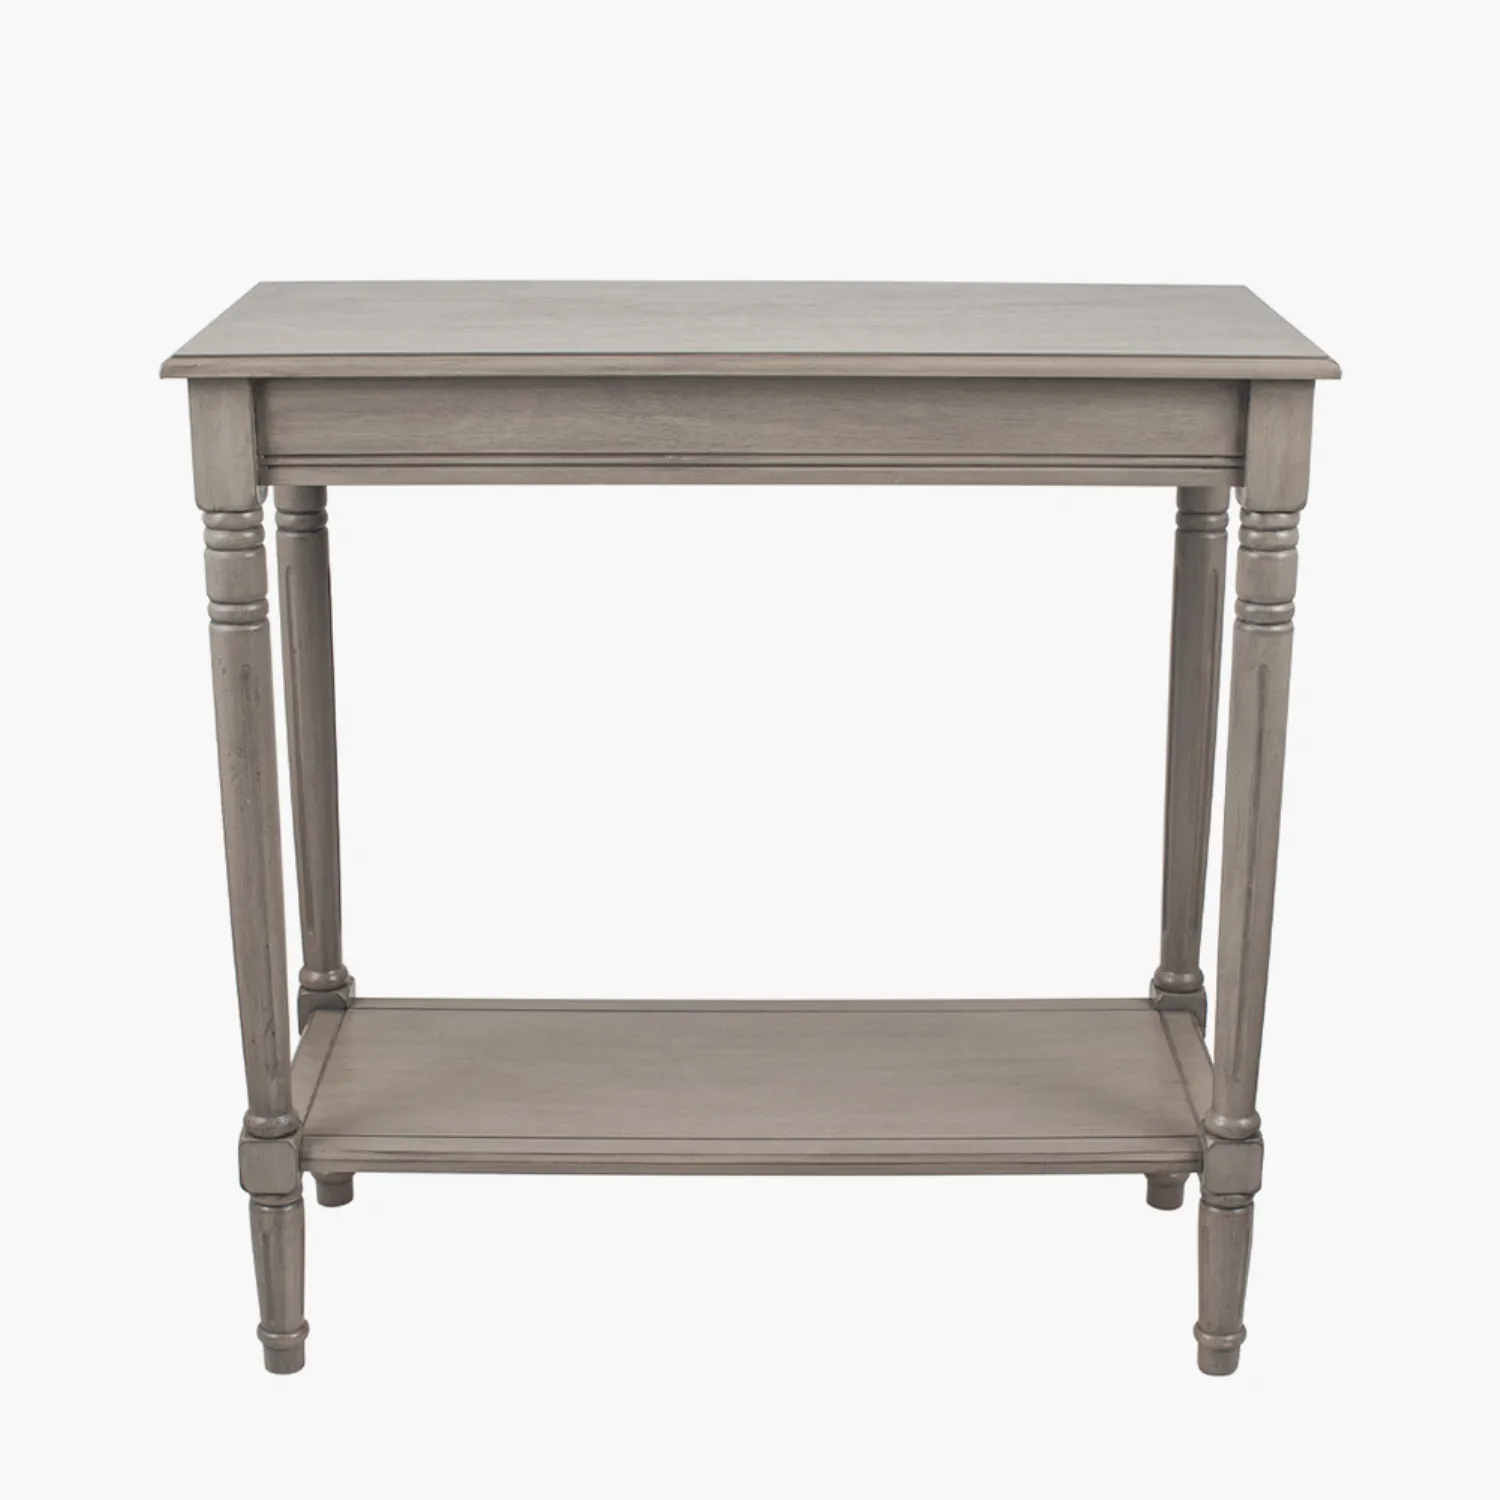 Taupe Pine Wood Rectangular Console Table